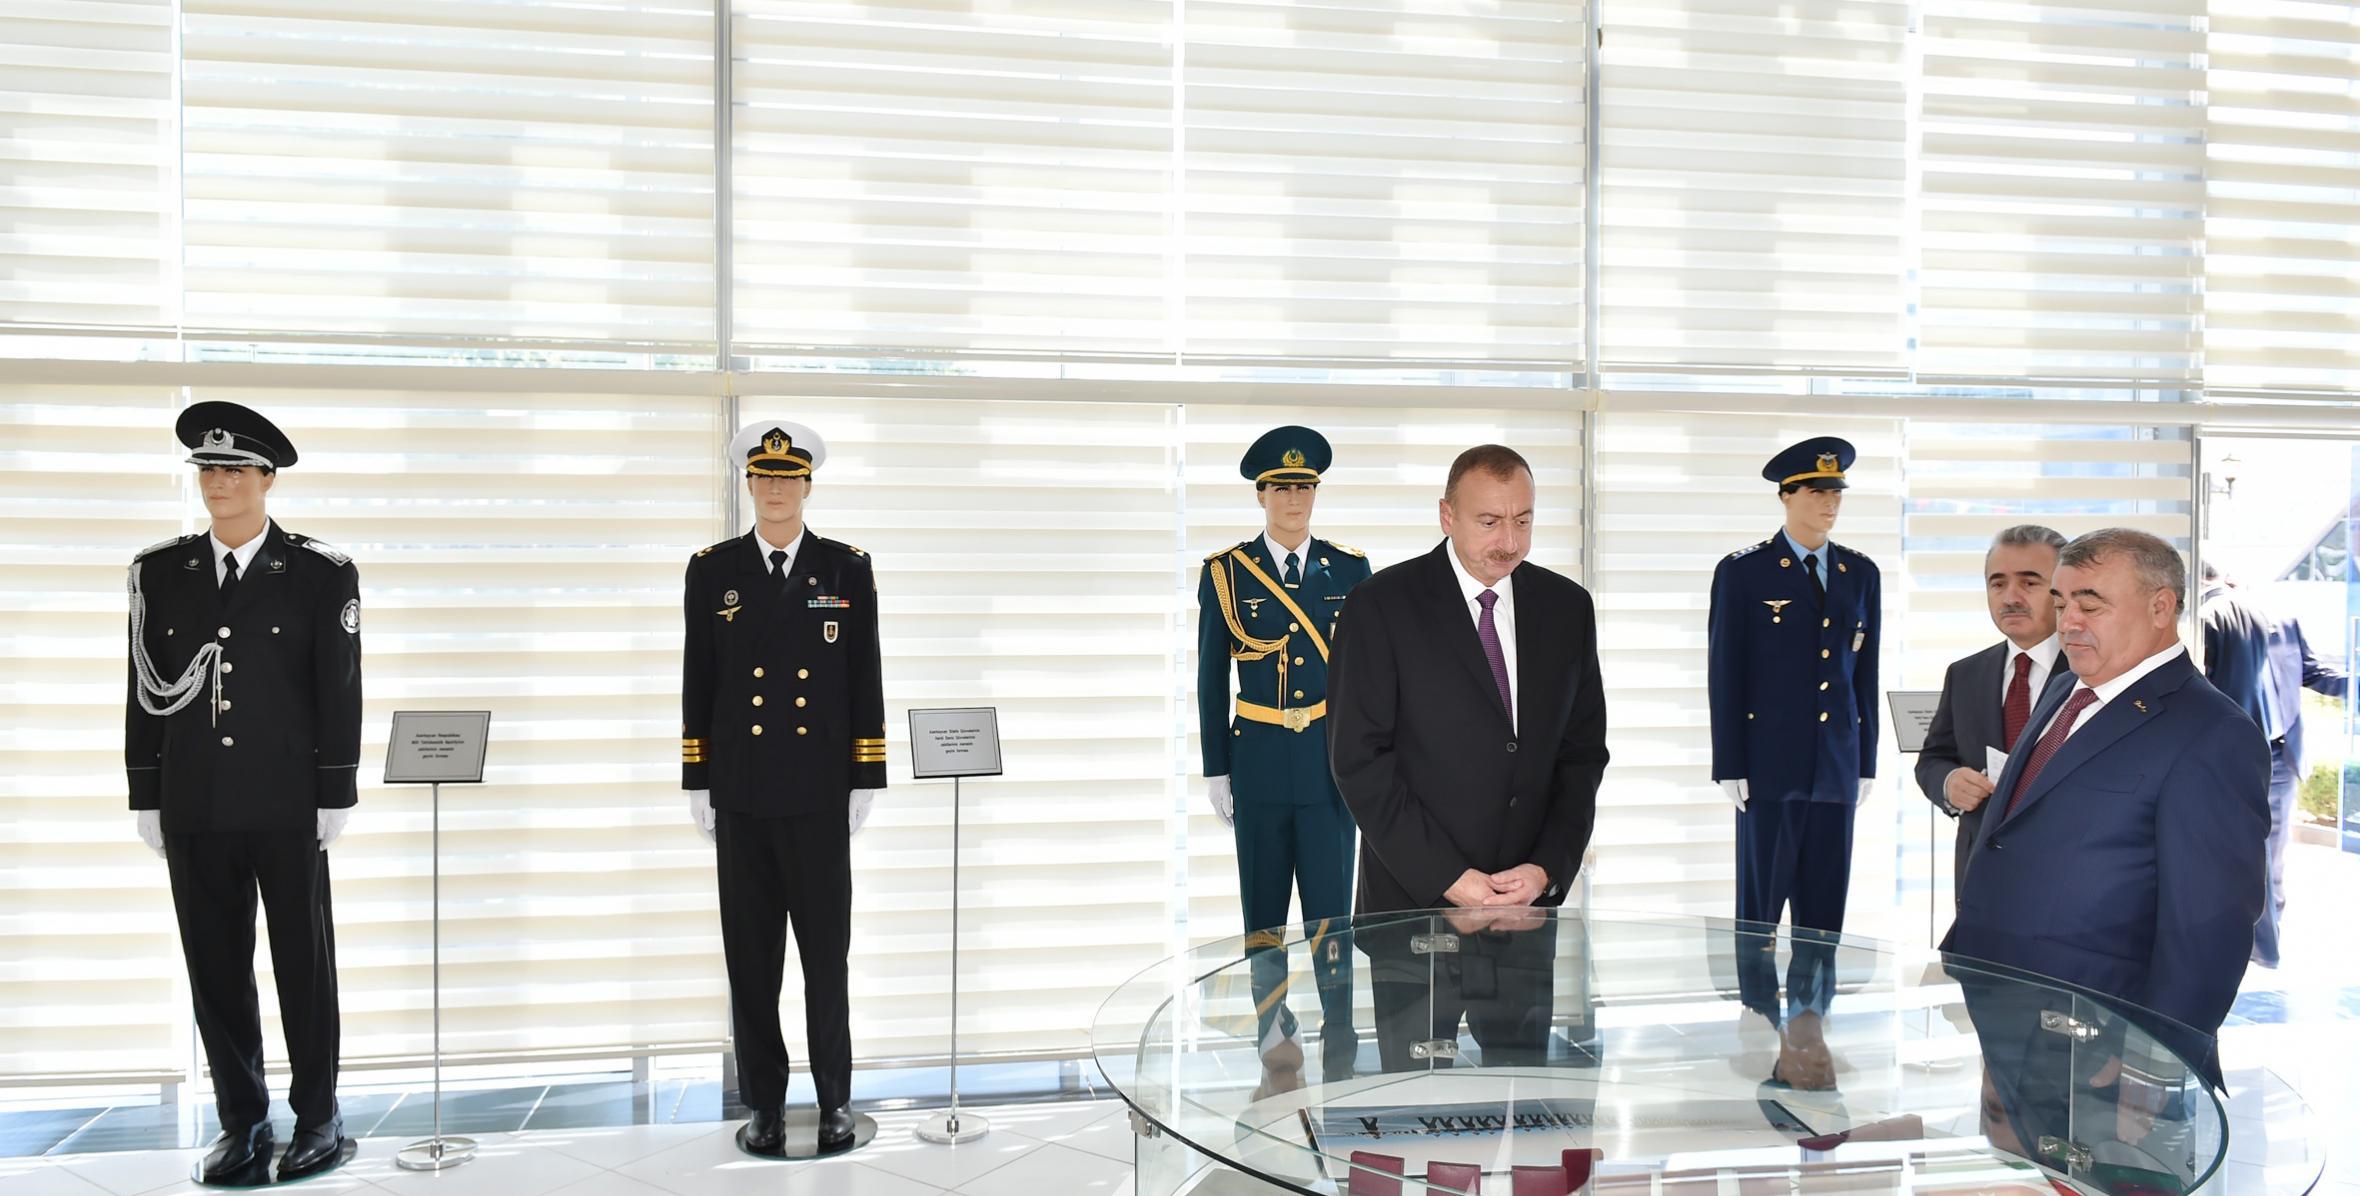 Ilham Aliyev reviewed the Flag Square in Goychay